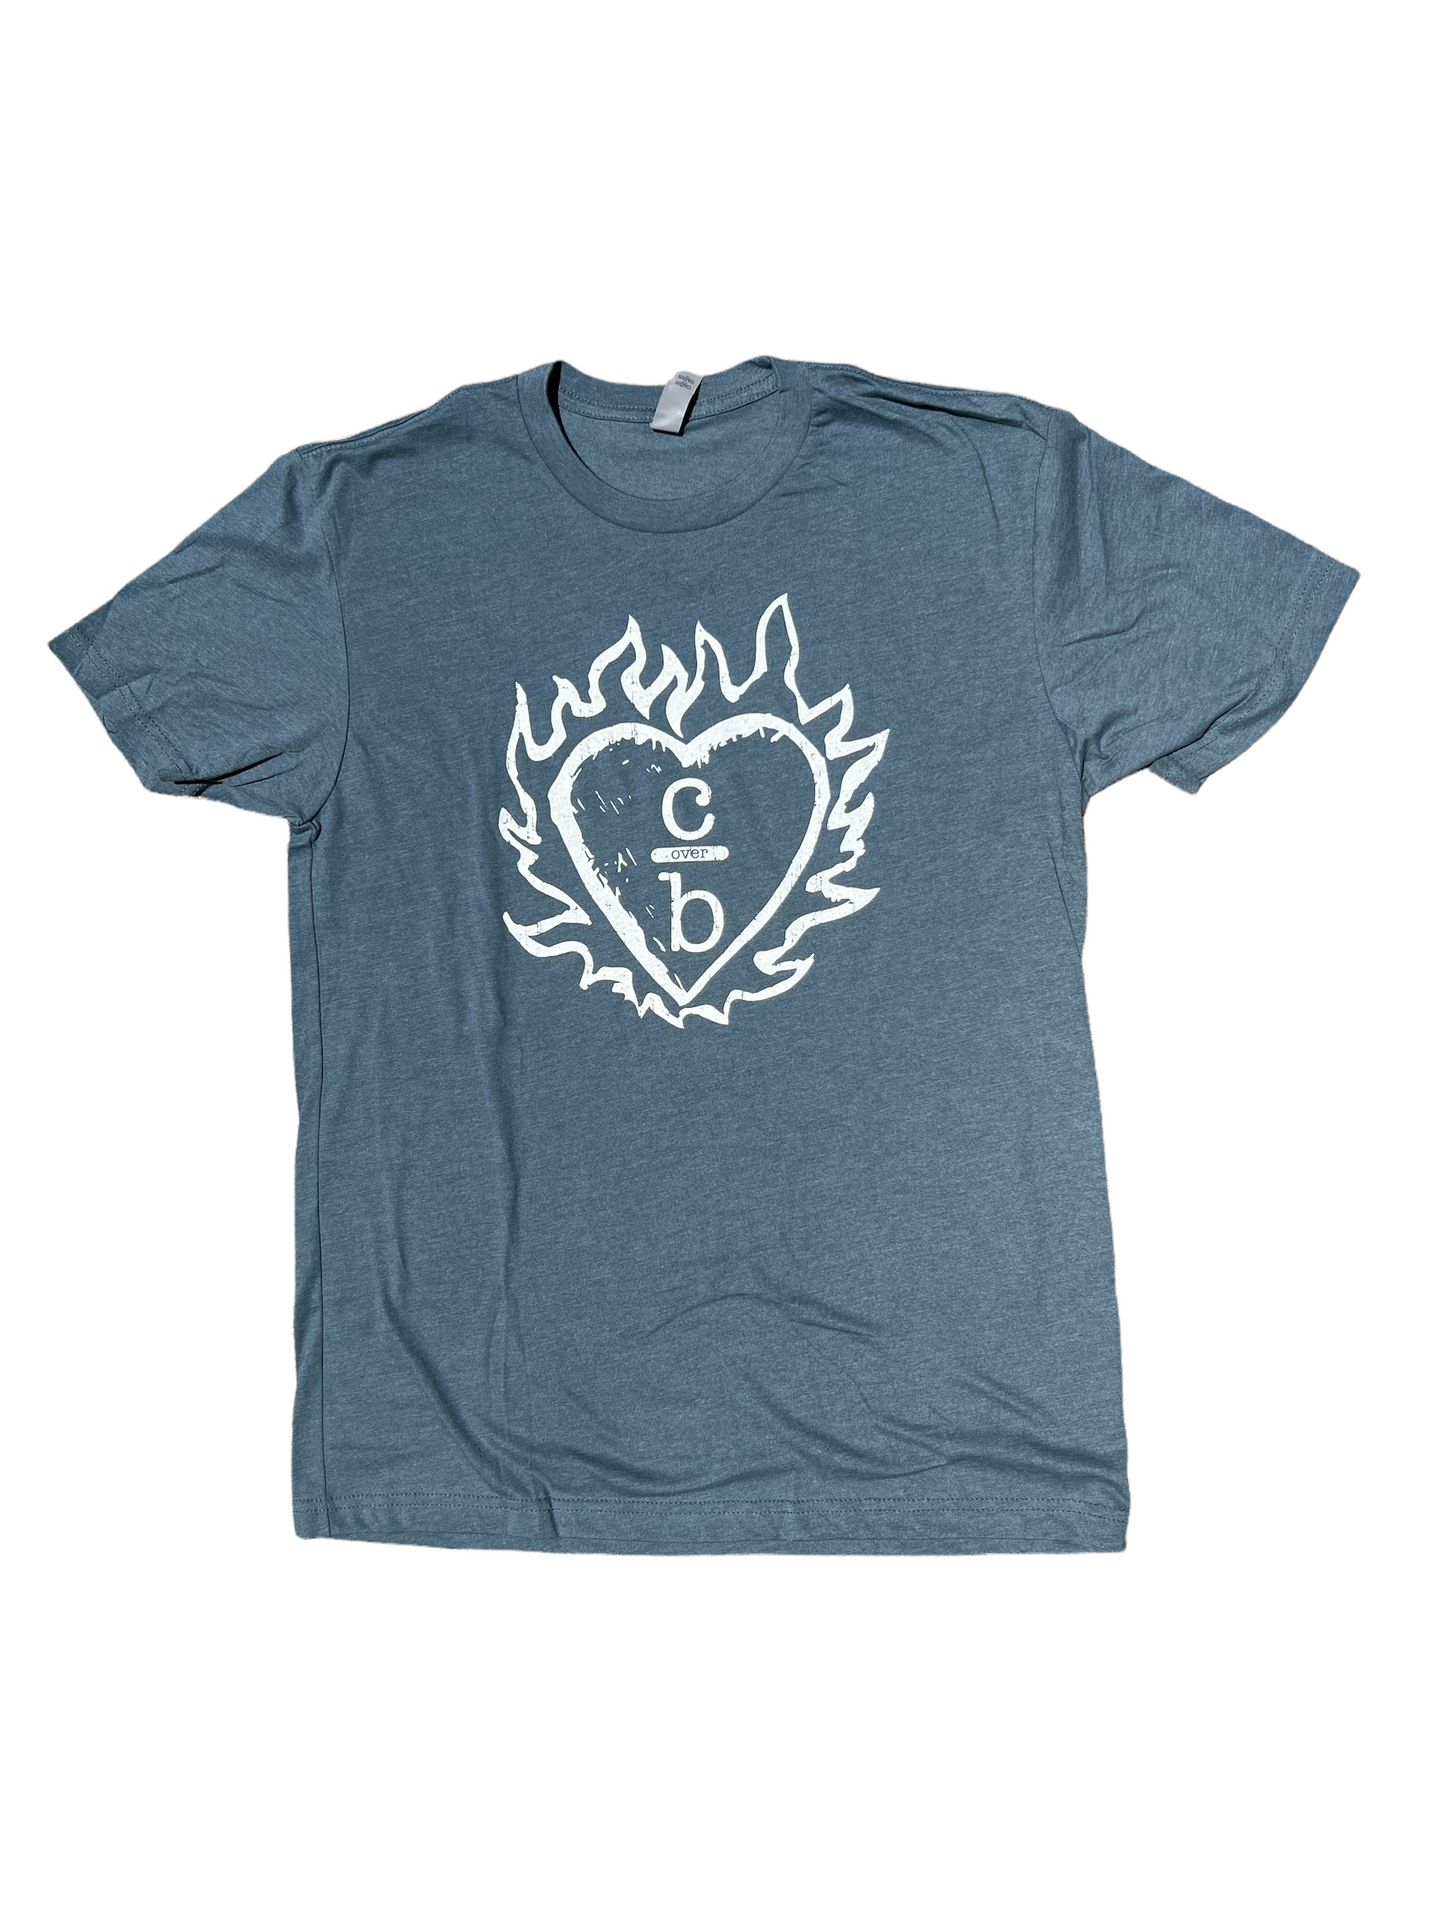 ONE TREE HILL Flame Heart Clothes Over Bros- T Shirt – Indigo